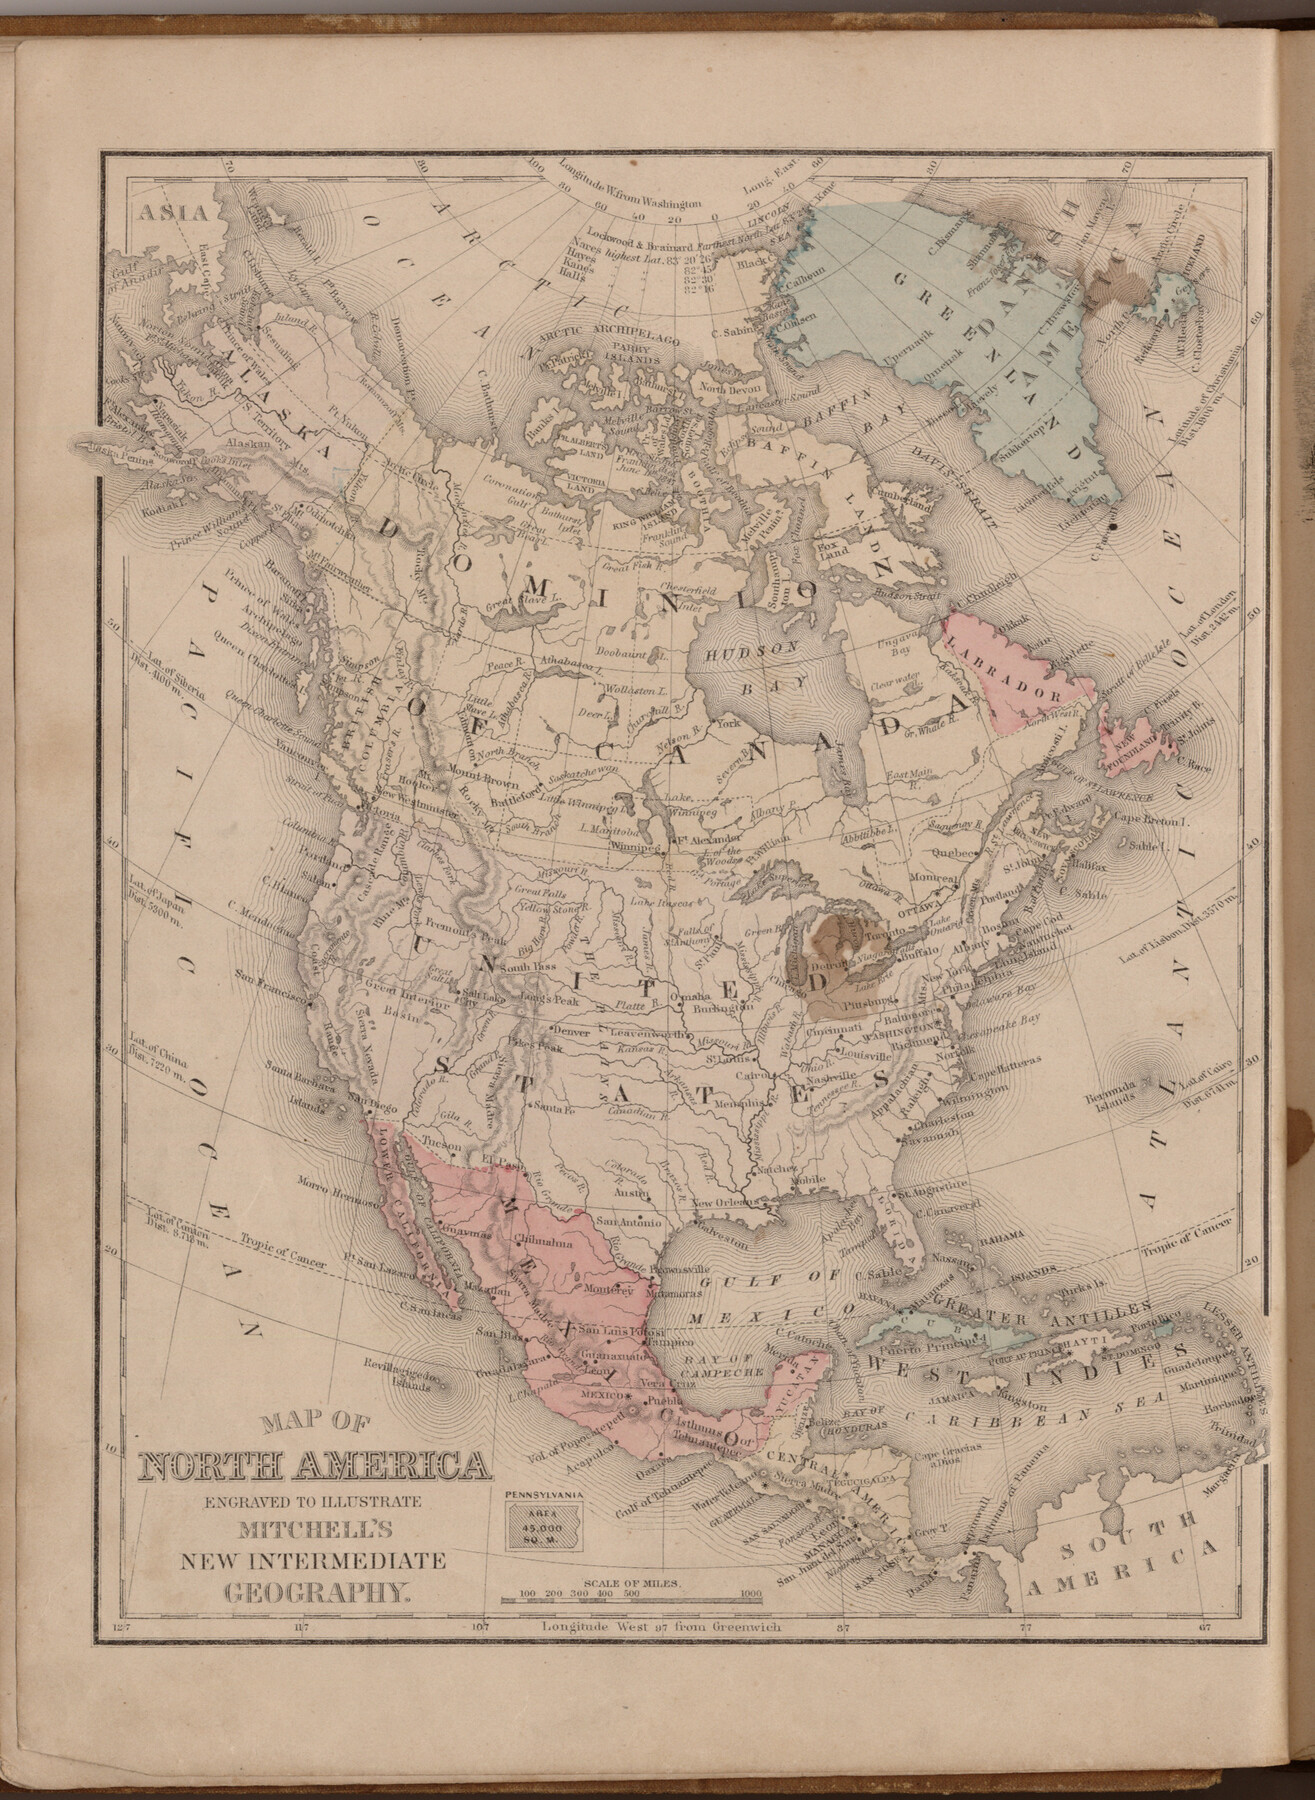 93512, Map of North America engraved to illustrate Mitchell's new intermediate geography, General Map Collection